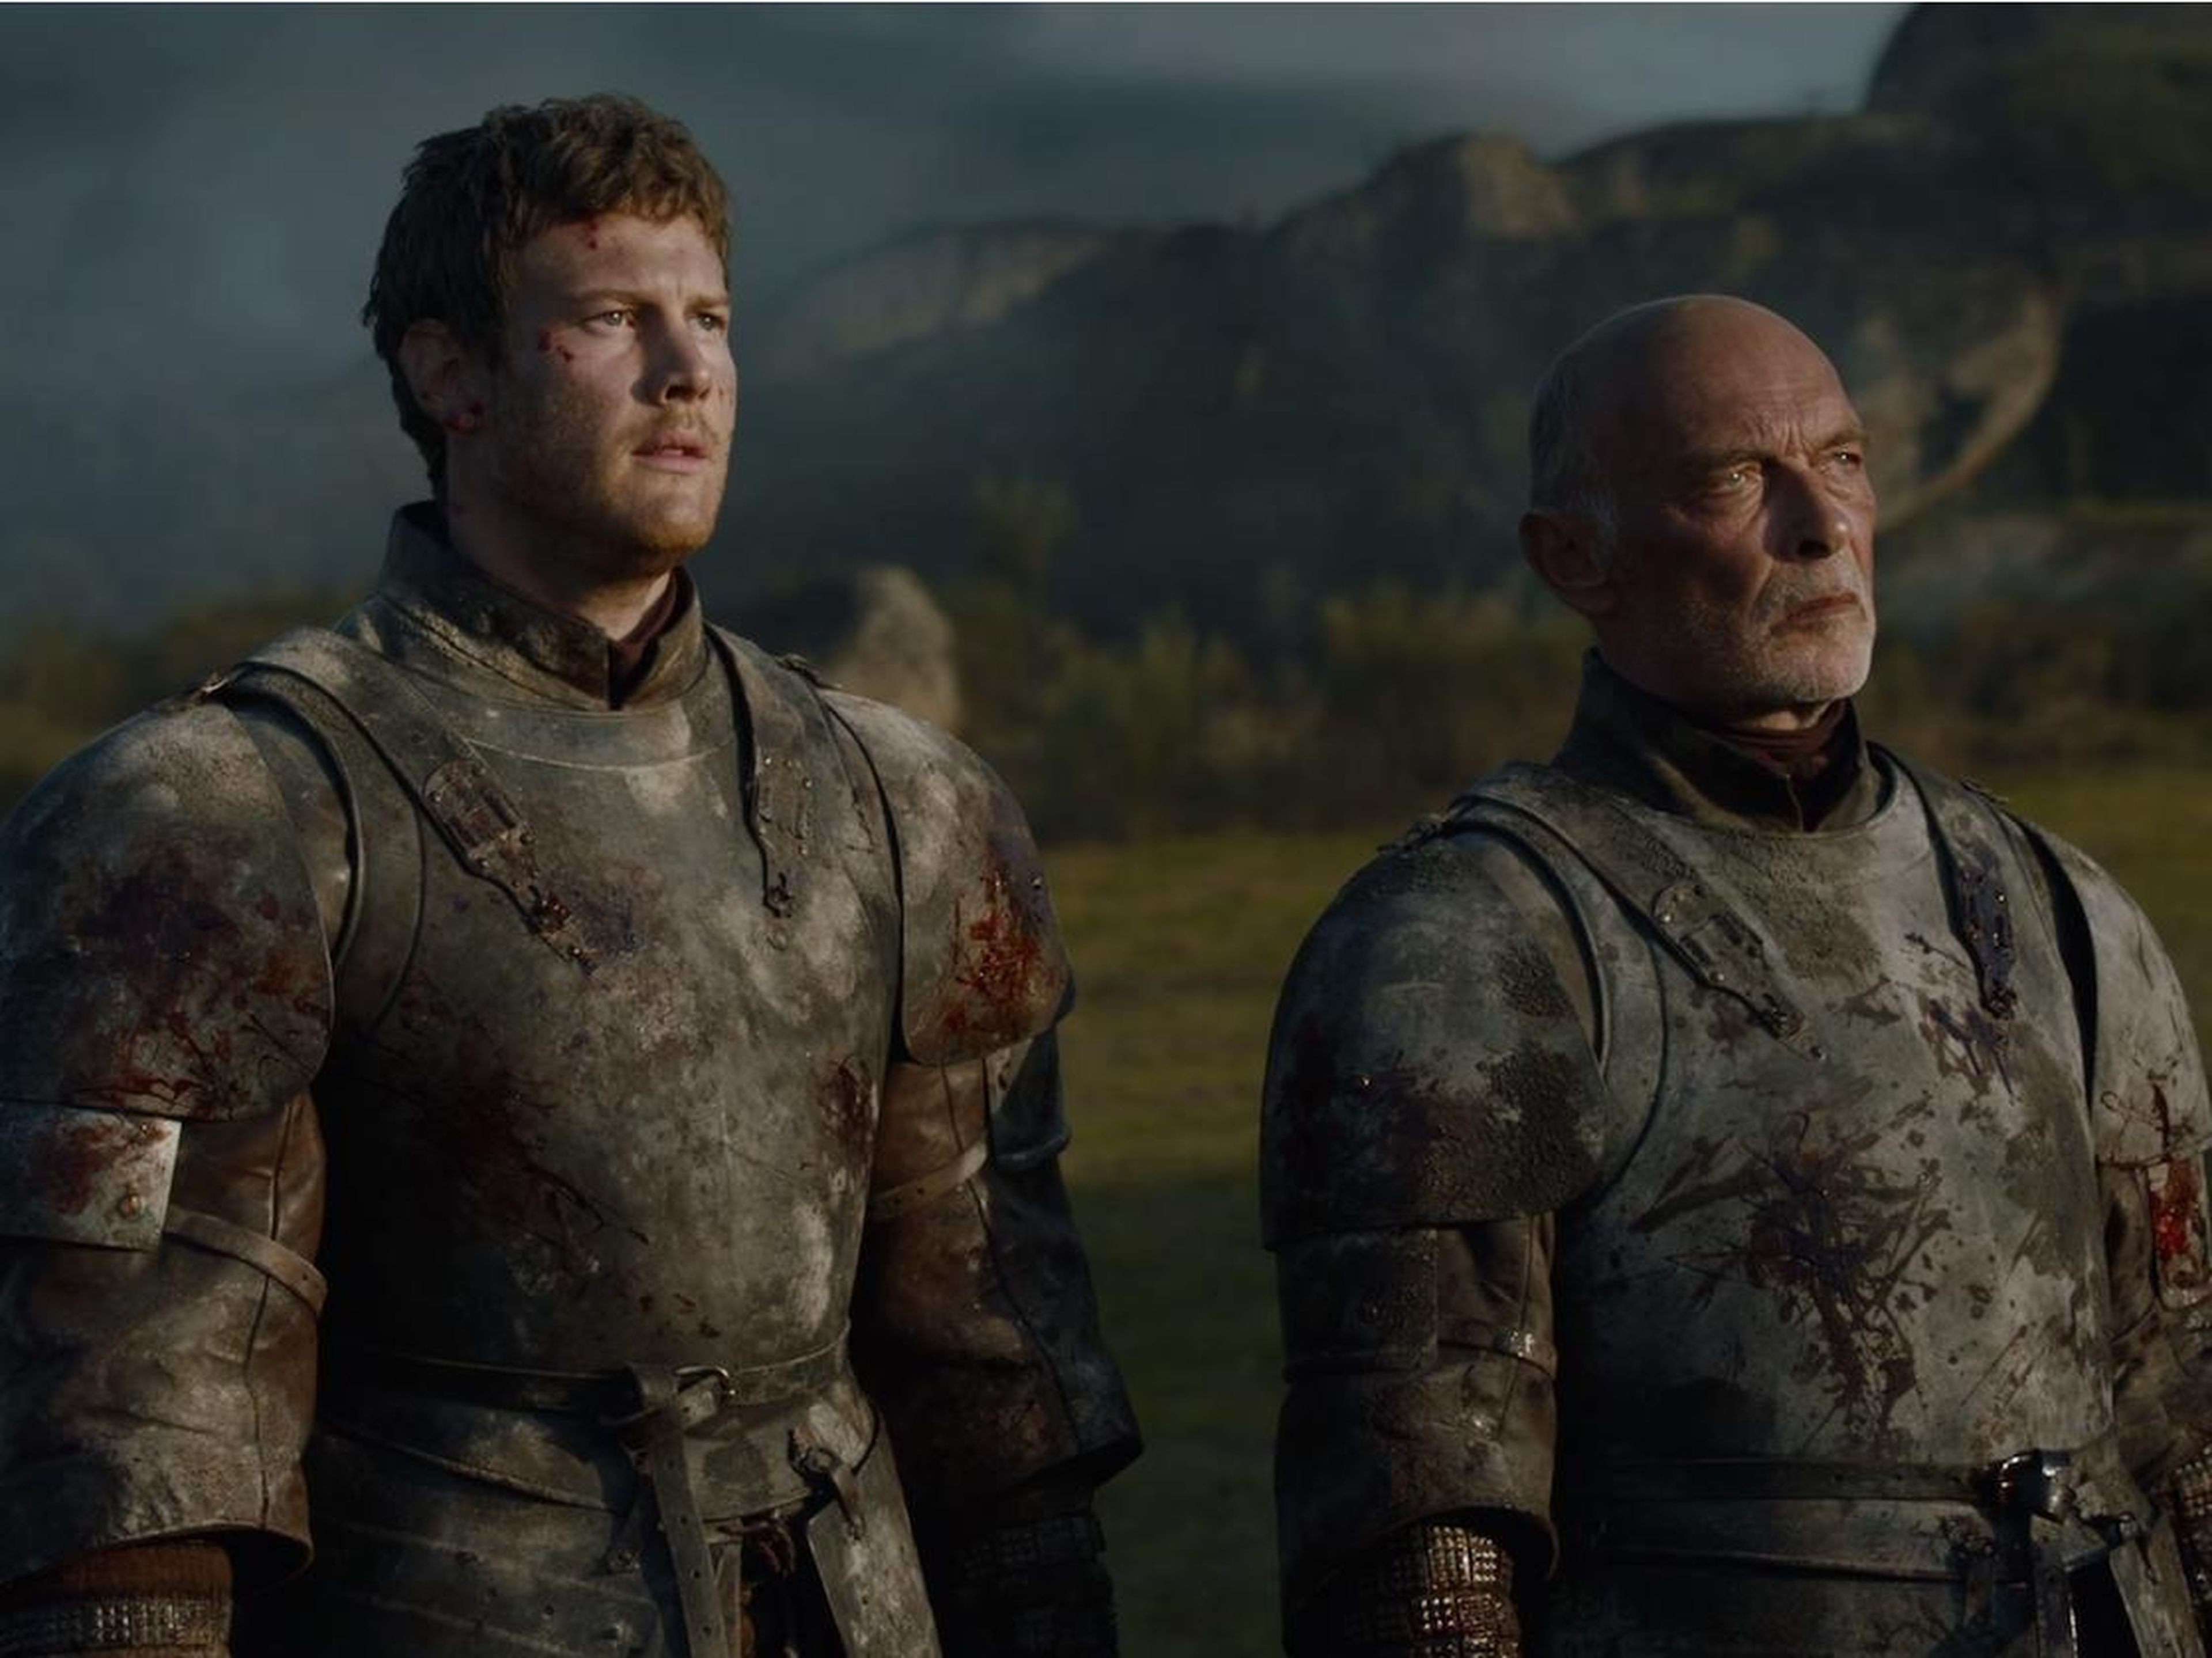 Dickon and Randyll Tarly were executed by Daenerys.